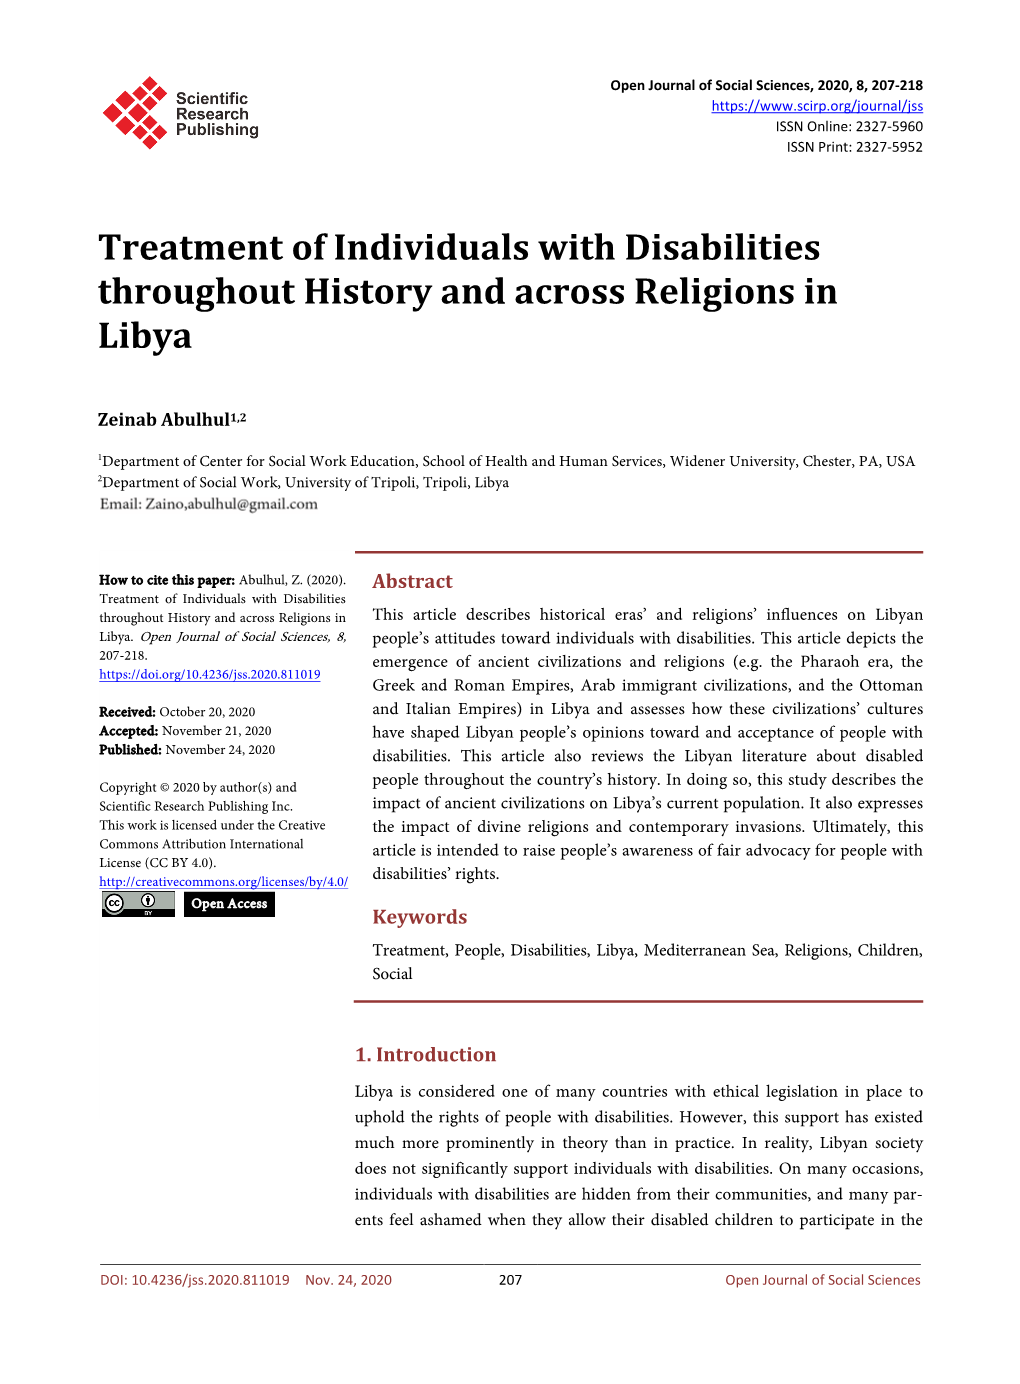 Treatment of Individuals with Disabilities Throughout History and Across Religions in Libya